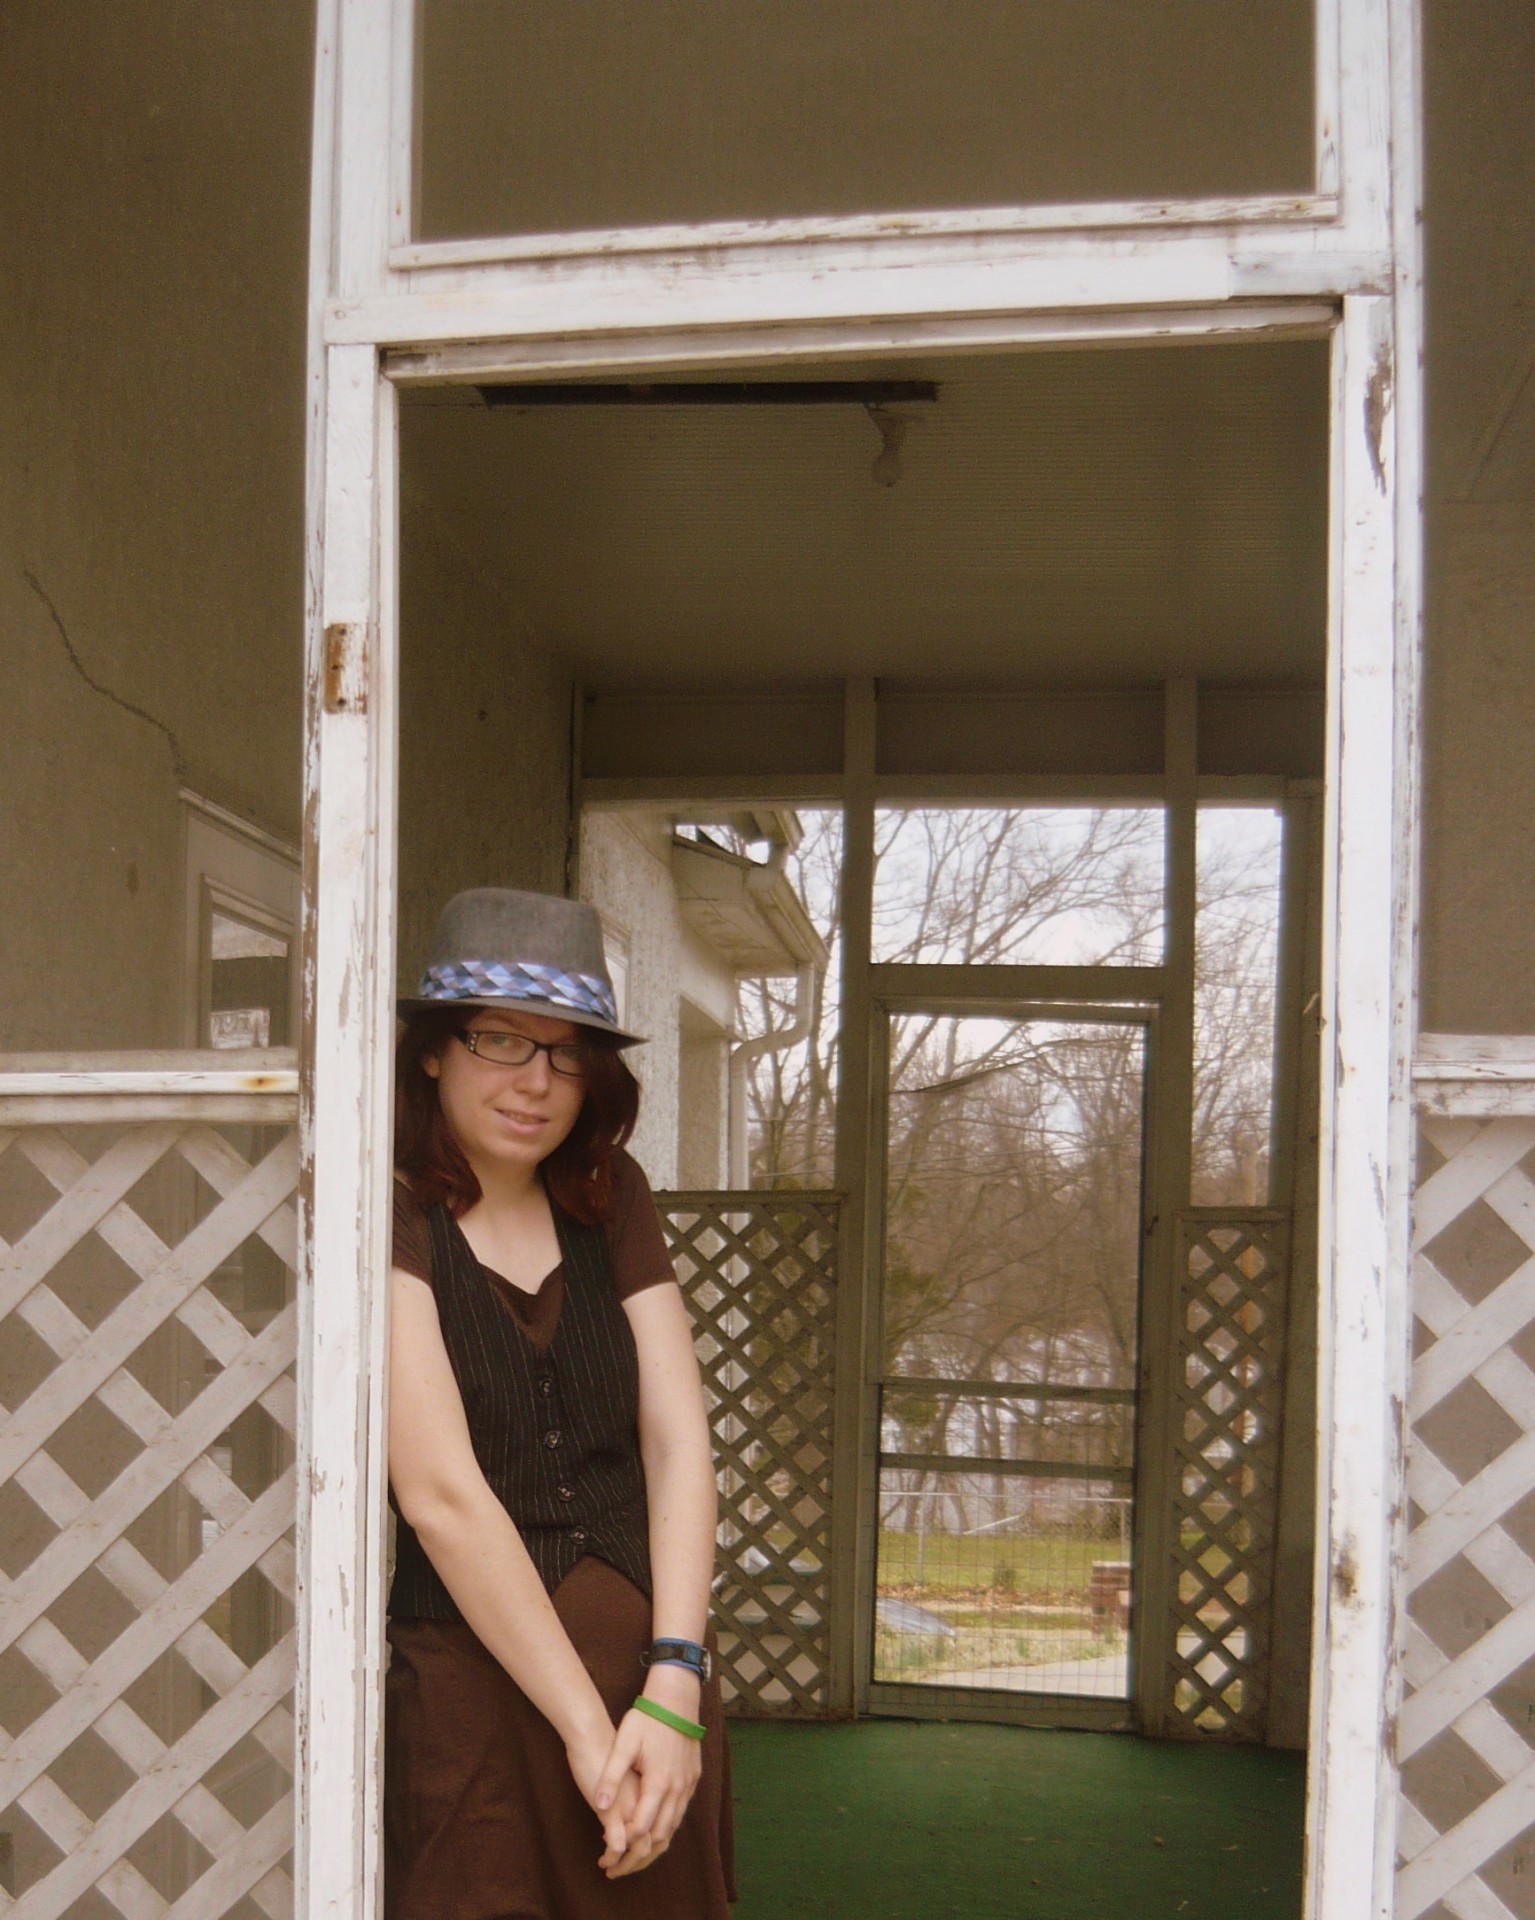 A redhead girl standing in a doorway, wearing hat and glasses